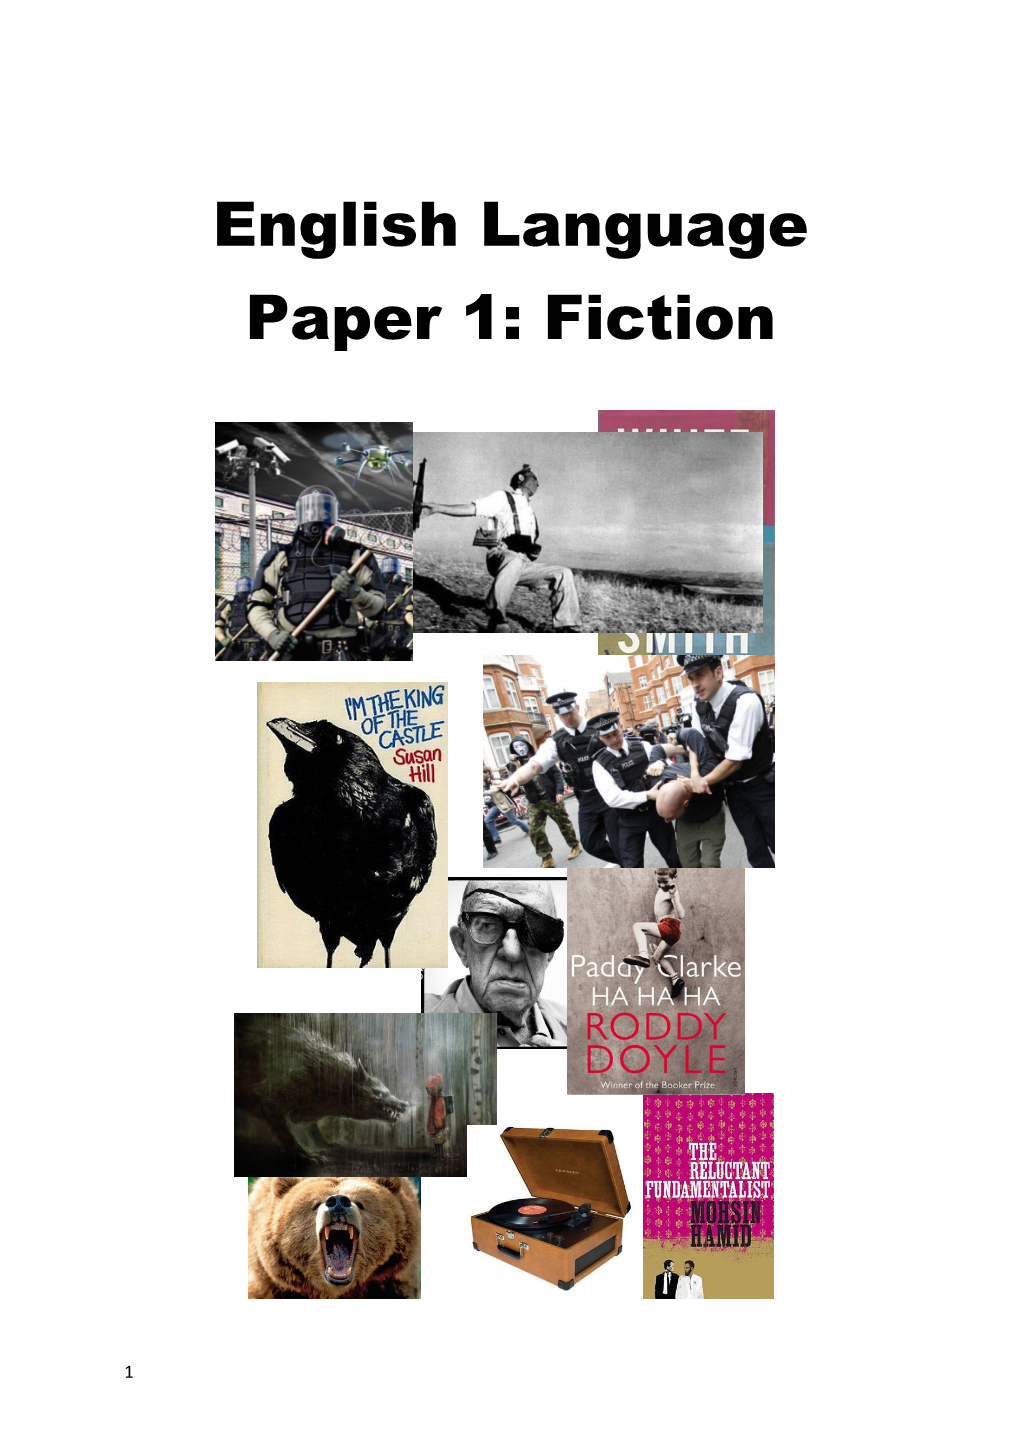 English Language Paper 1: Explorations in Creative Reading and Writing (1 Hour 45 Minutes)